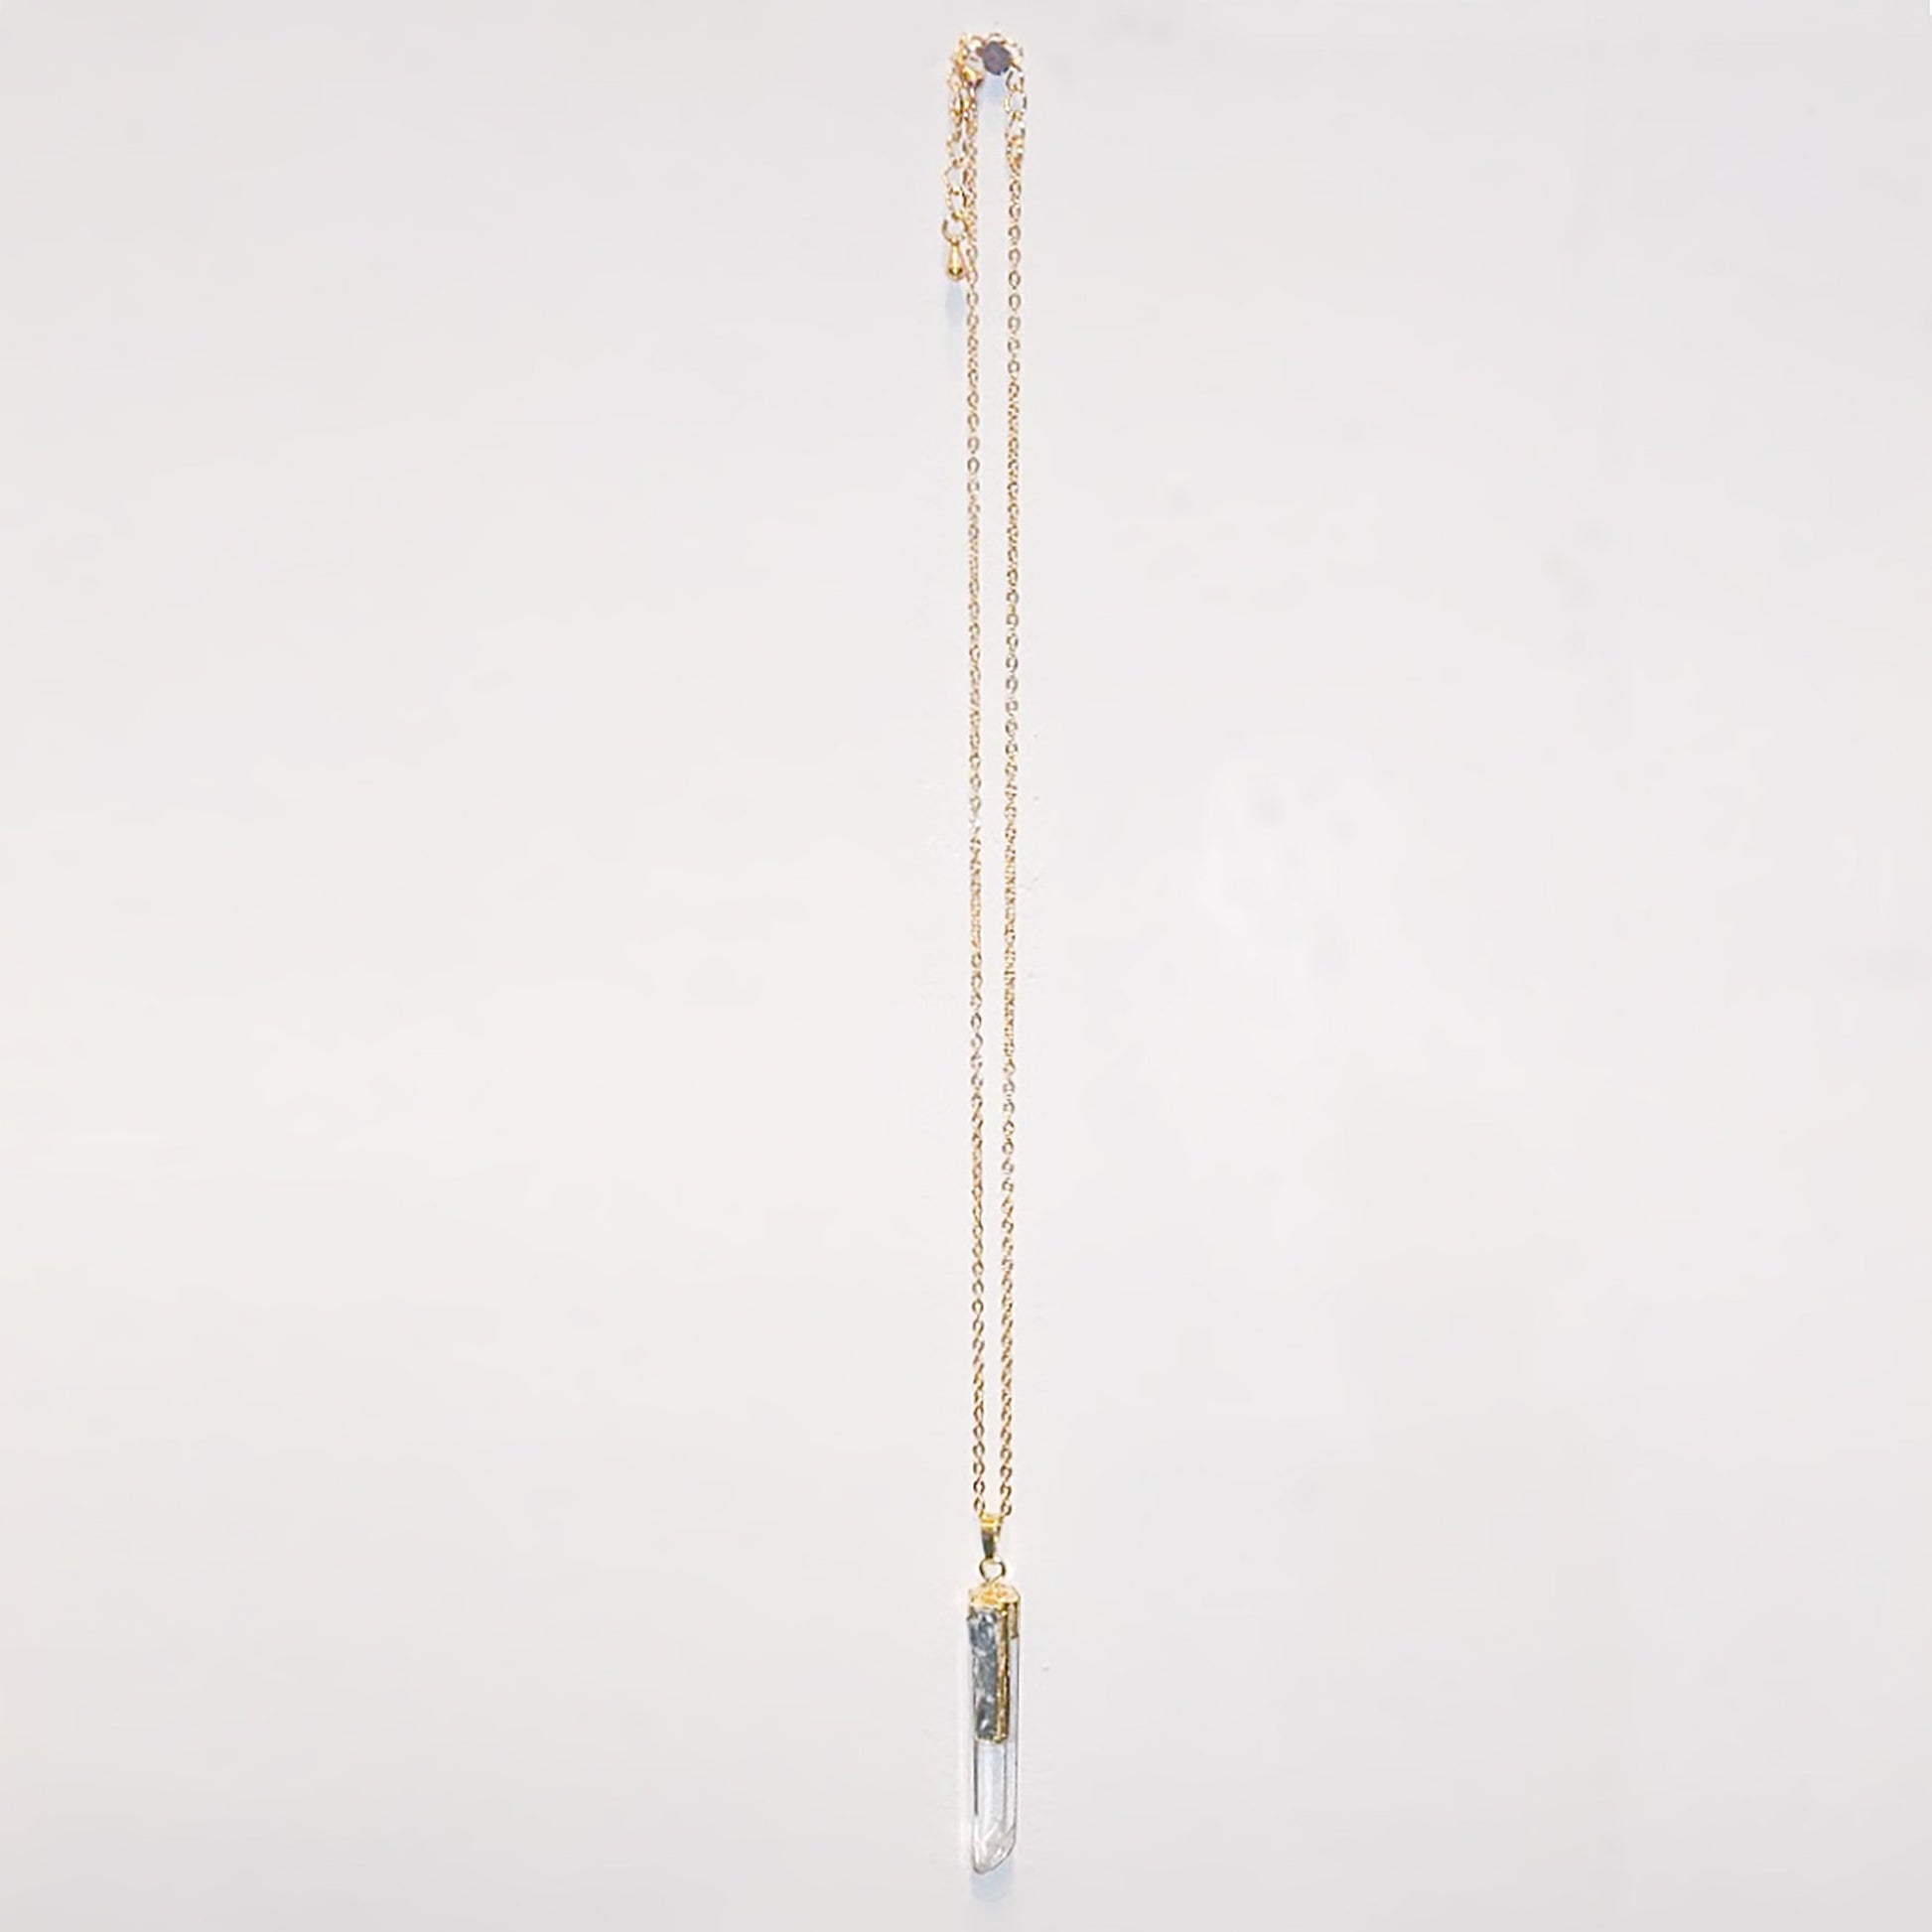 Clear Crystal and Kyanite Necklace, Necklaces, HEED THE HUM